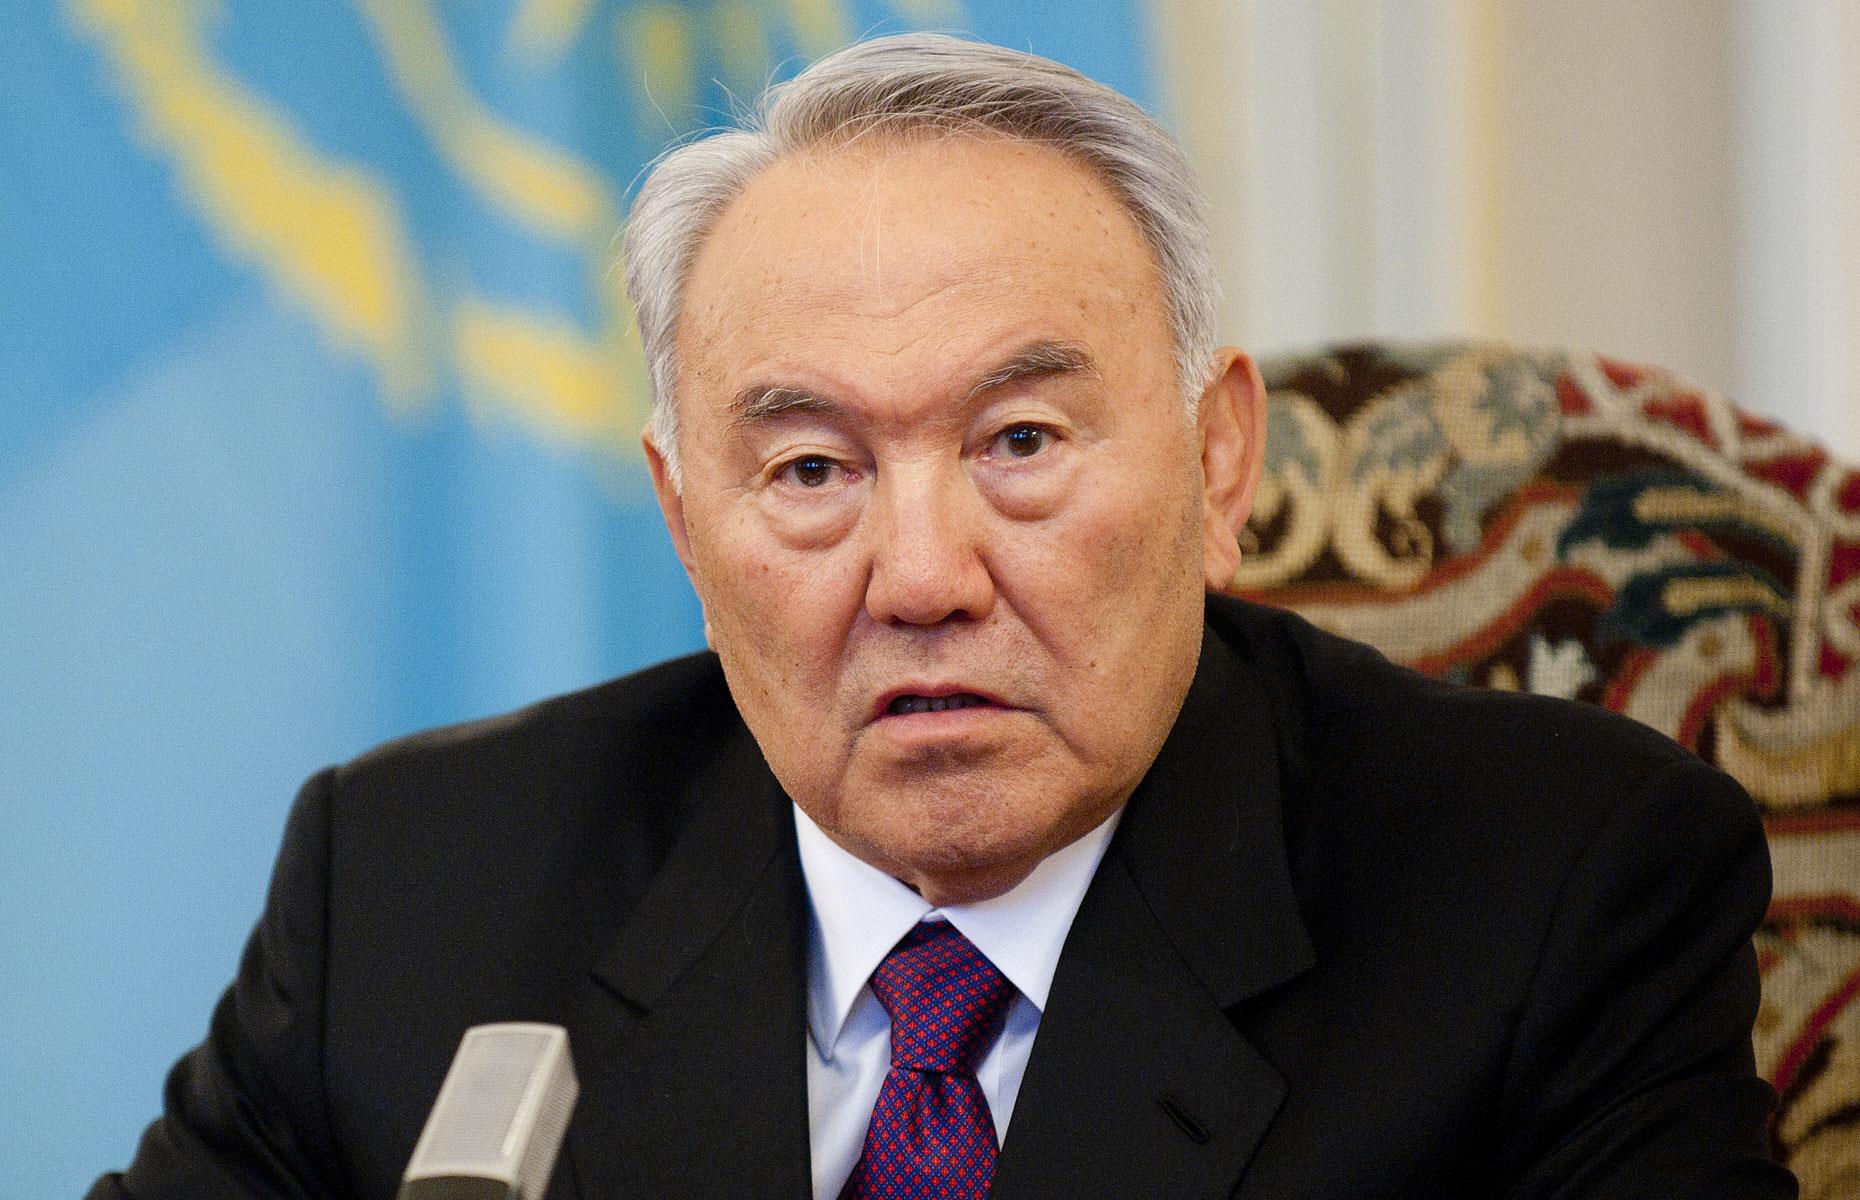 Nursultan Nazarbayev served as president of Kazakhstan from 24 April 1990 until his resignation in March 2019. During his 29 years in office, the strongman leader was accused of widespread human right abuses, not to mention rampant corruption, and is said to have amassed a fortune of $1 billion.